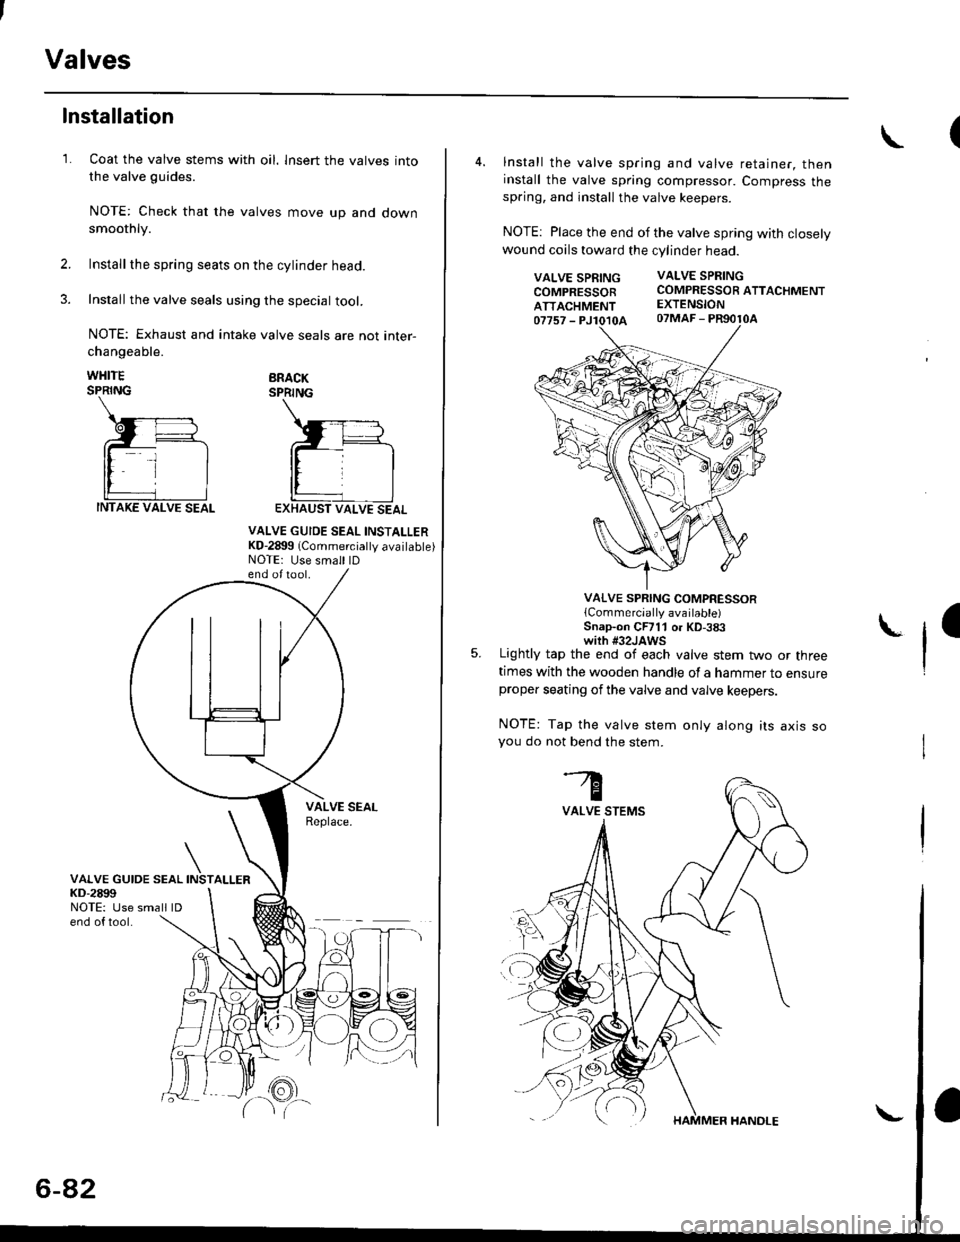 HONDA CIVIC 1996 6.G Owners Guide Valves
1.
Installation
Coat the valve stems with oil. lnsert the valves into
the valve guides.
NOTE: Check that the valves move up and downsmoothly.
Installthe spring seats on the cylinder head.
Insta